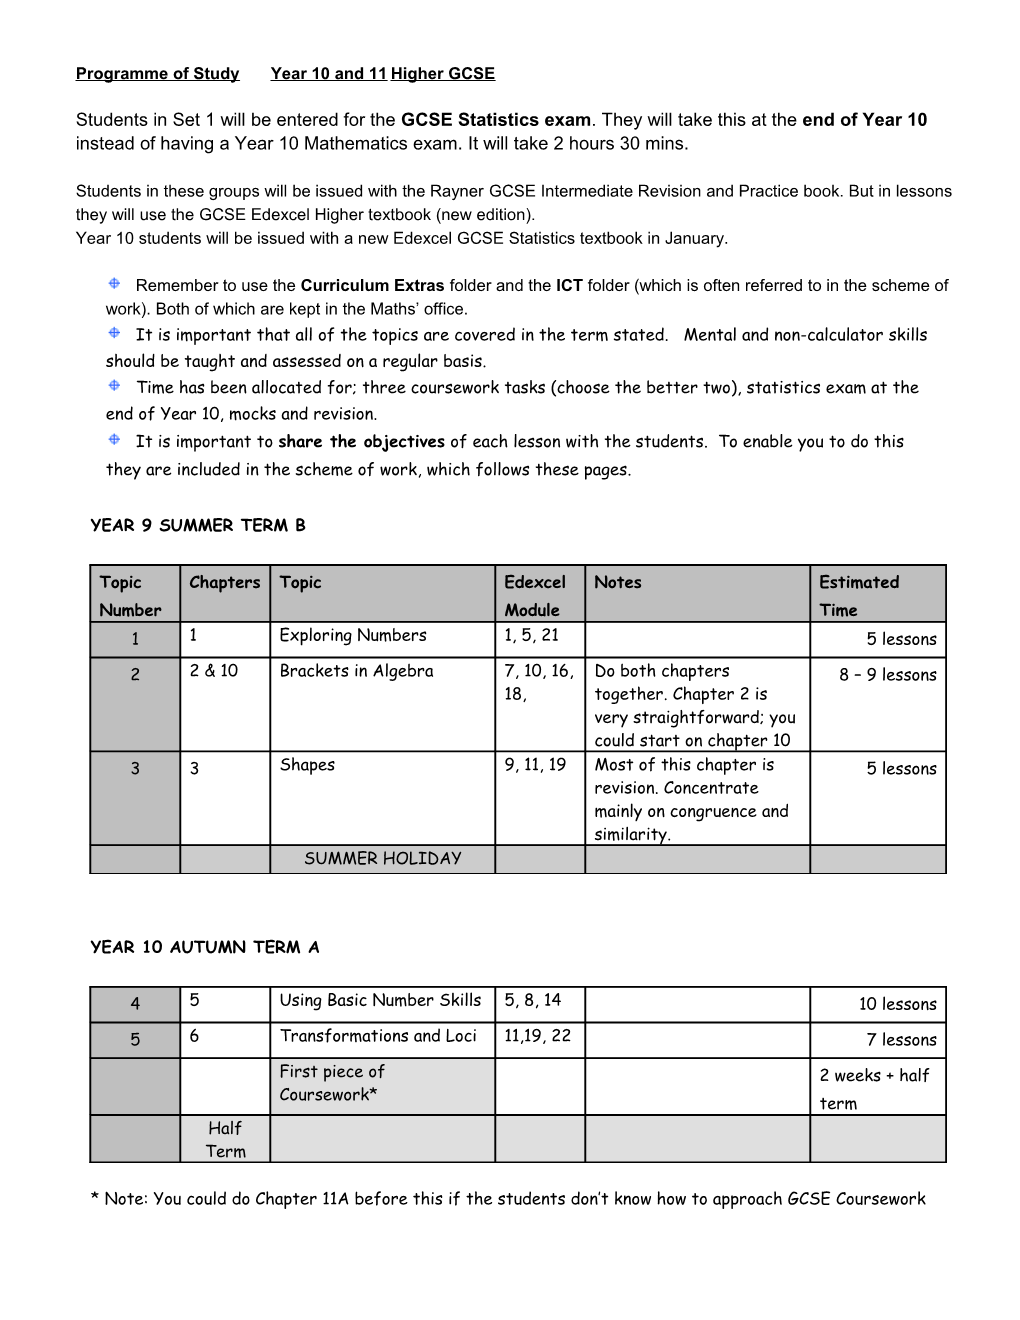 Programme of Study - Year 10 and 11 - Higher GCSE Summary